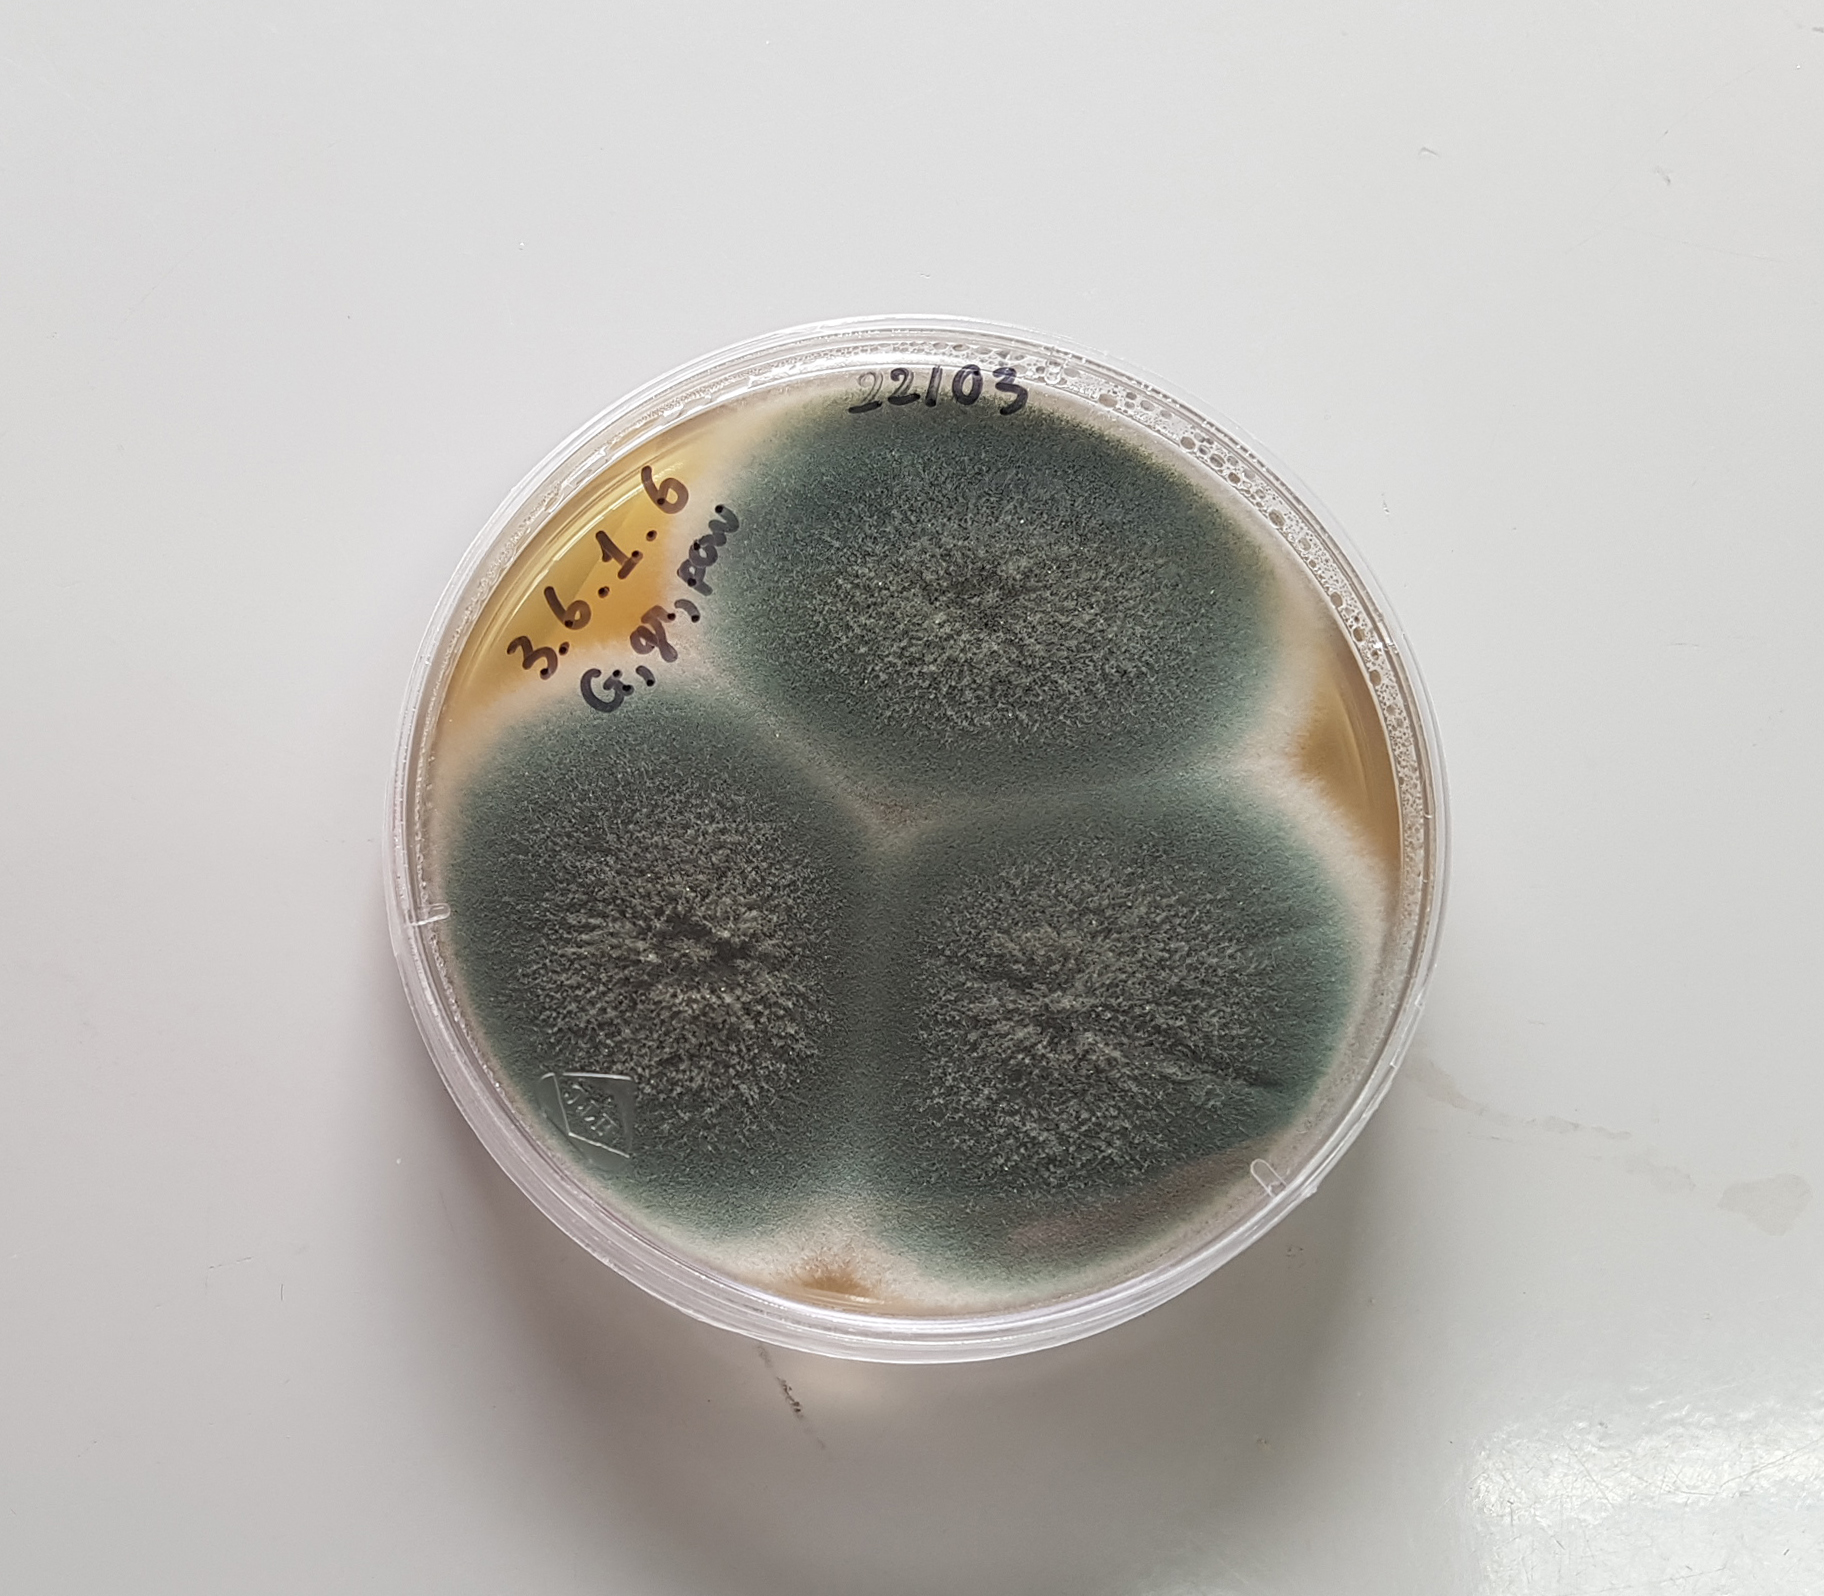 An Aspergillus fumigatus sample, one of the fungus species named of greatest concern by the WHO. 